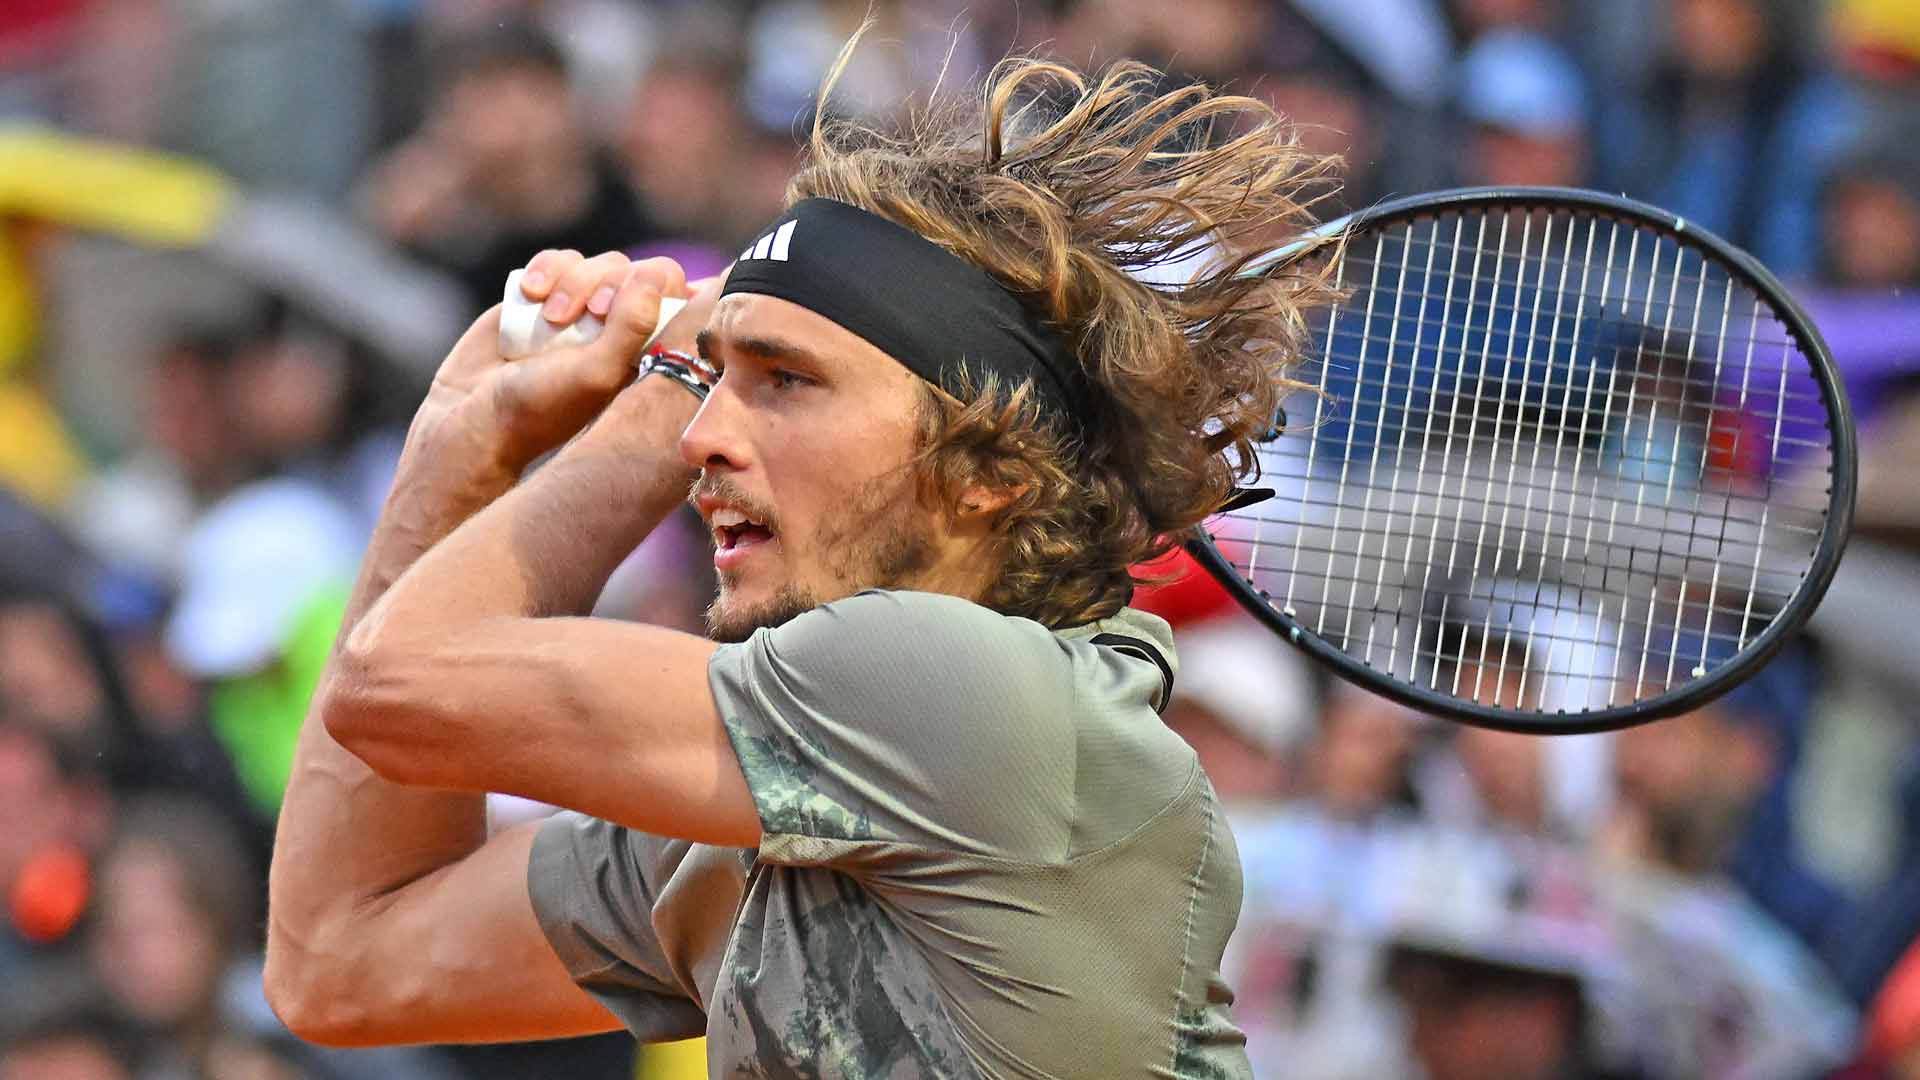 Alexander Zverev in action against J.J. Wolf on Monday evening in Rome.